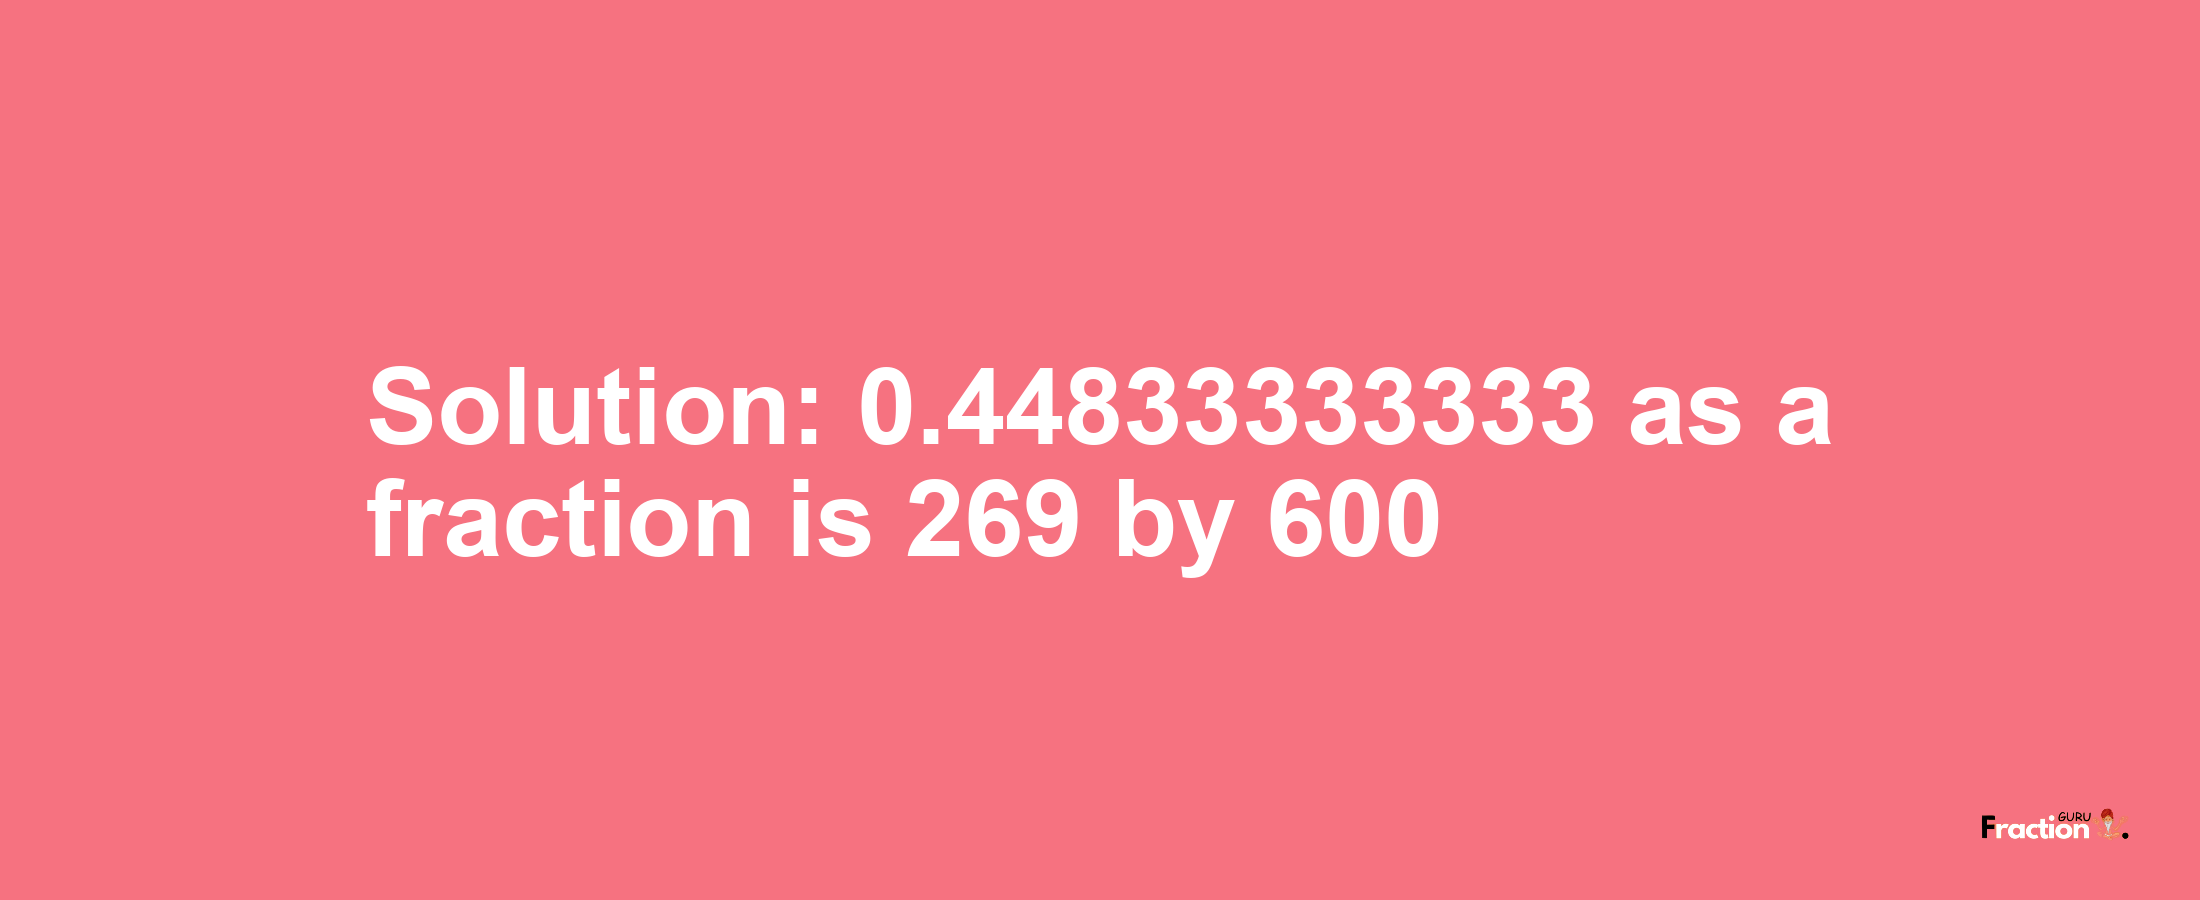 Solution:0.44833333333 as a fraction is 269/600